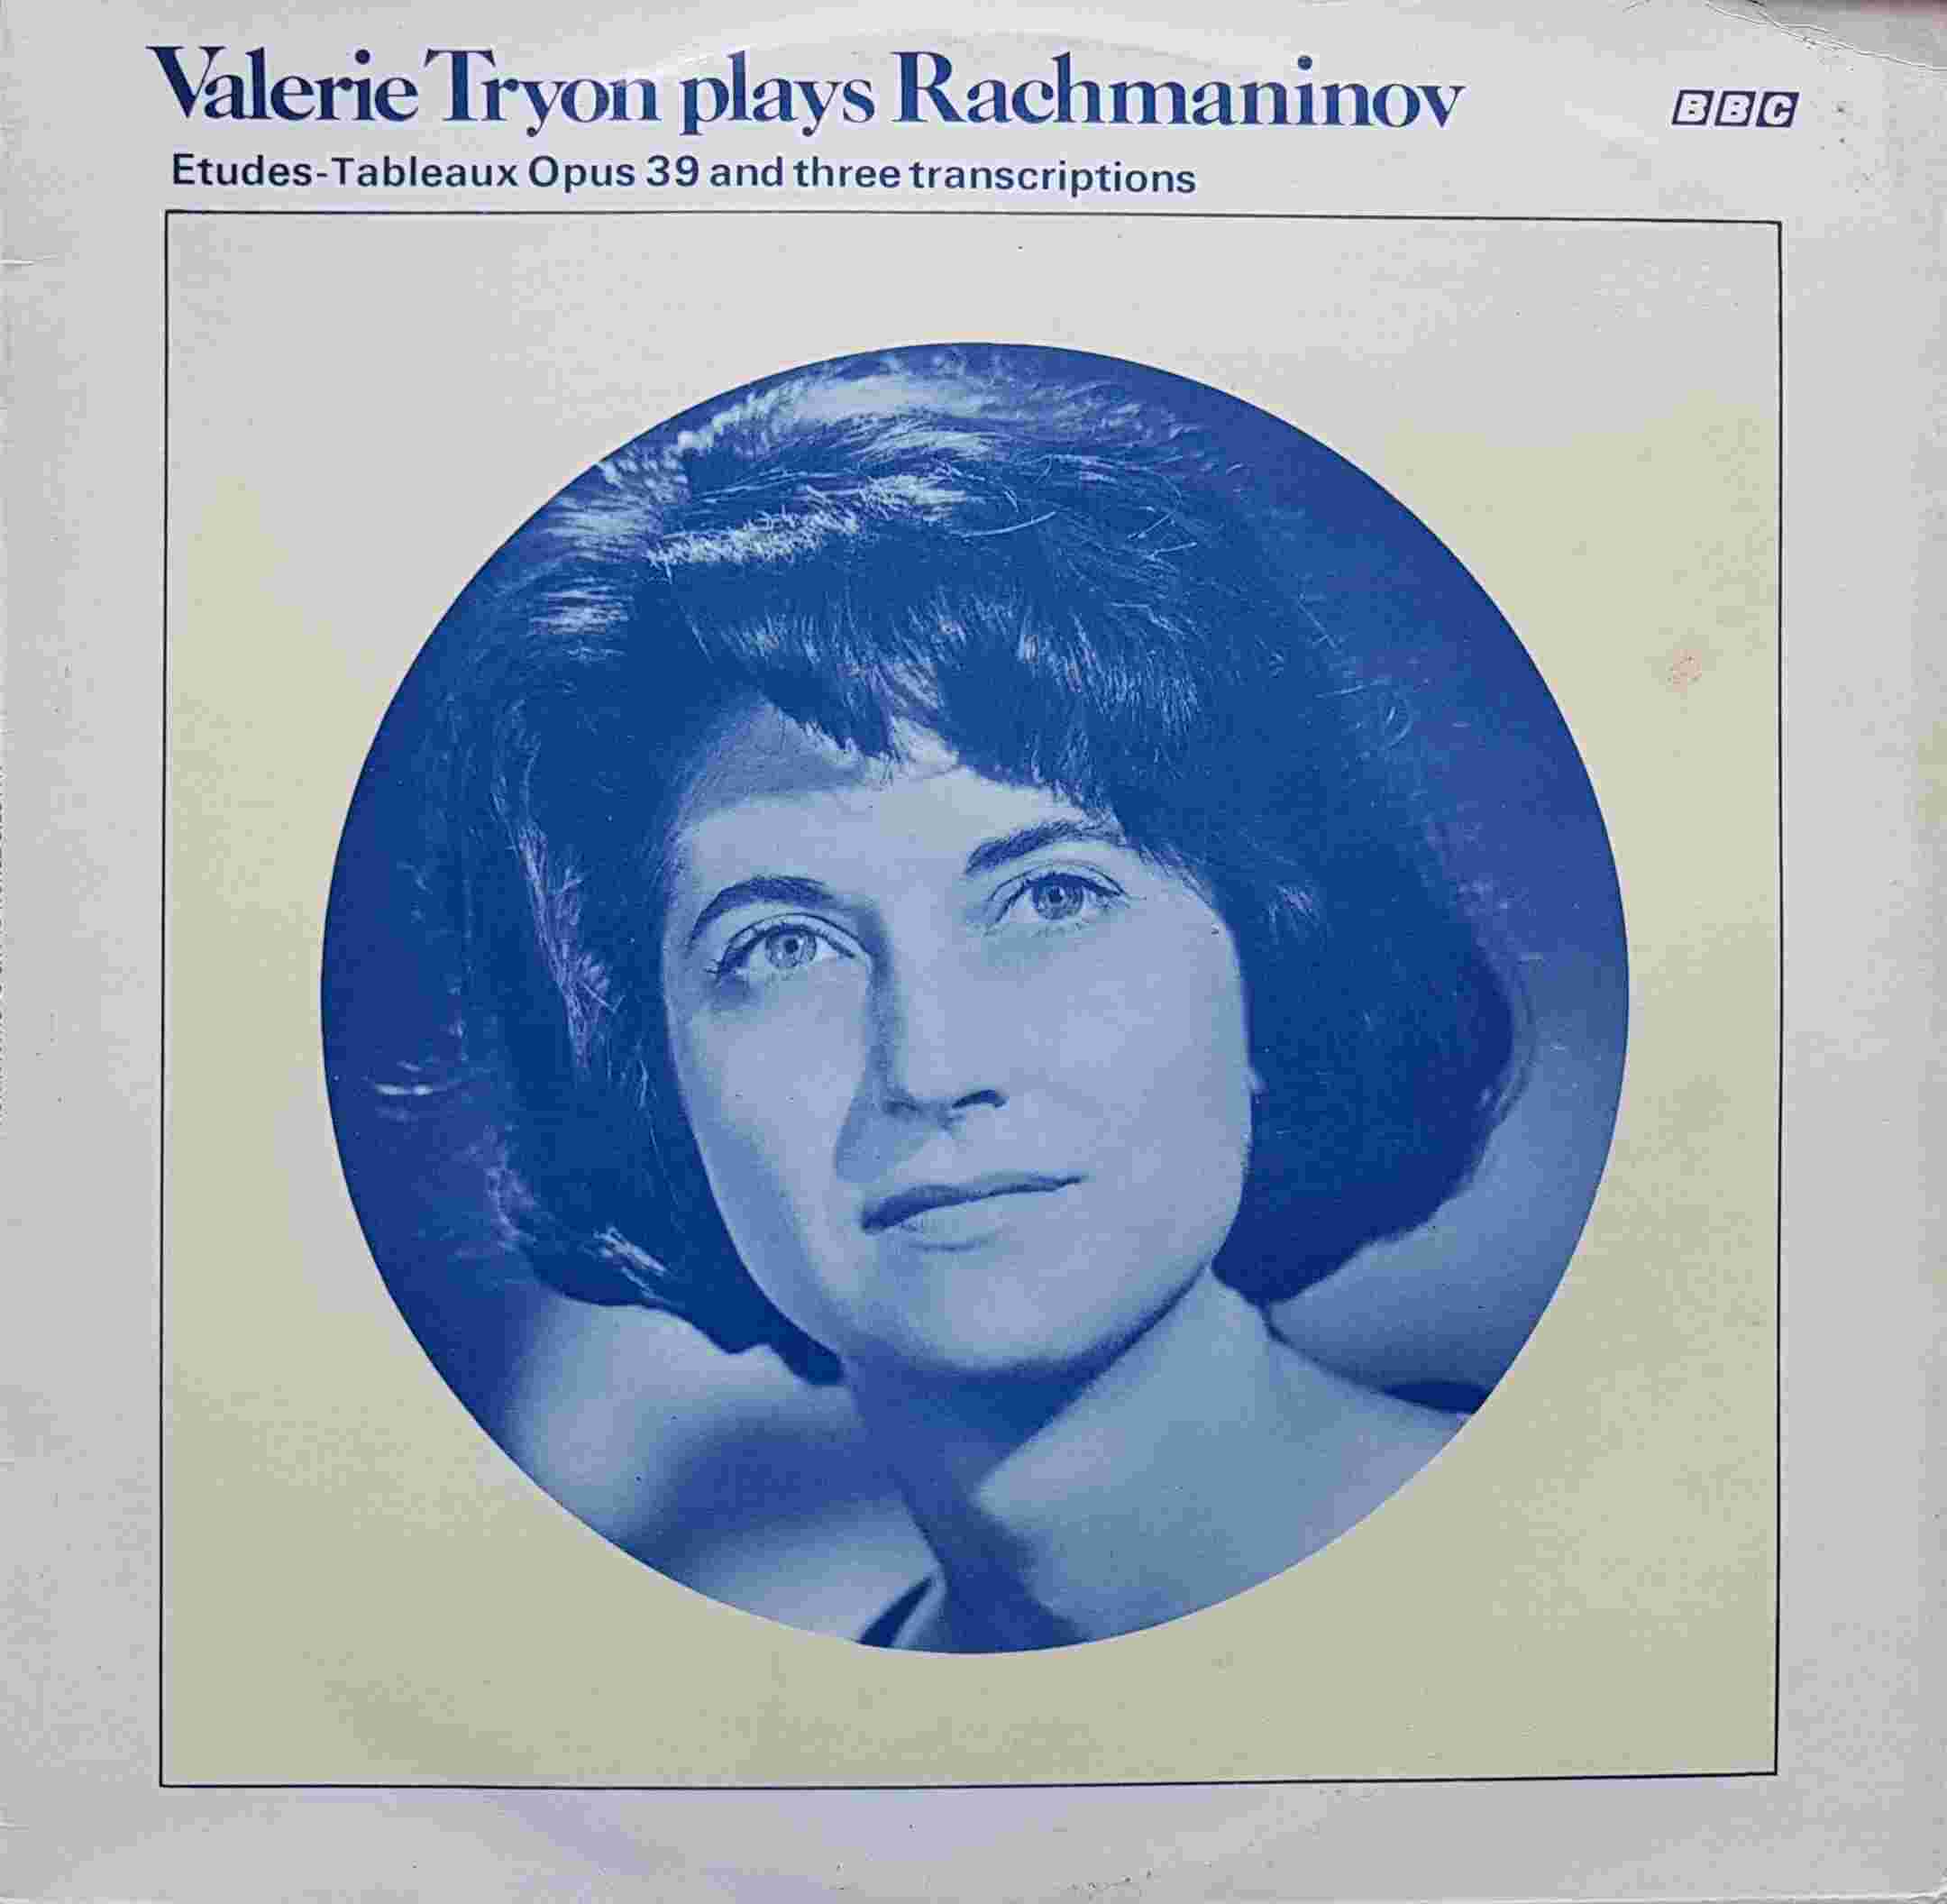 Picture of REB 27 Valerie Tryon plays Rachmaninov by artist Rachmaninov / Valerie Tryon from the BBC albums - Records and Tapes library